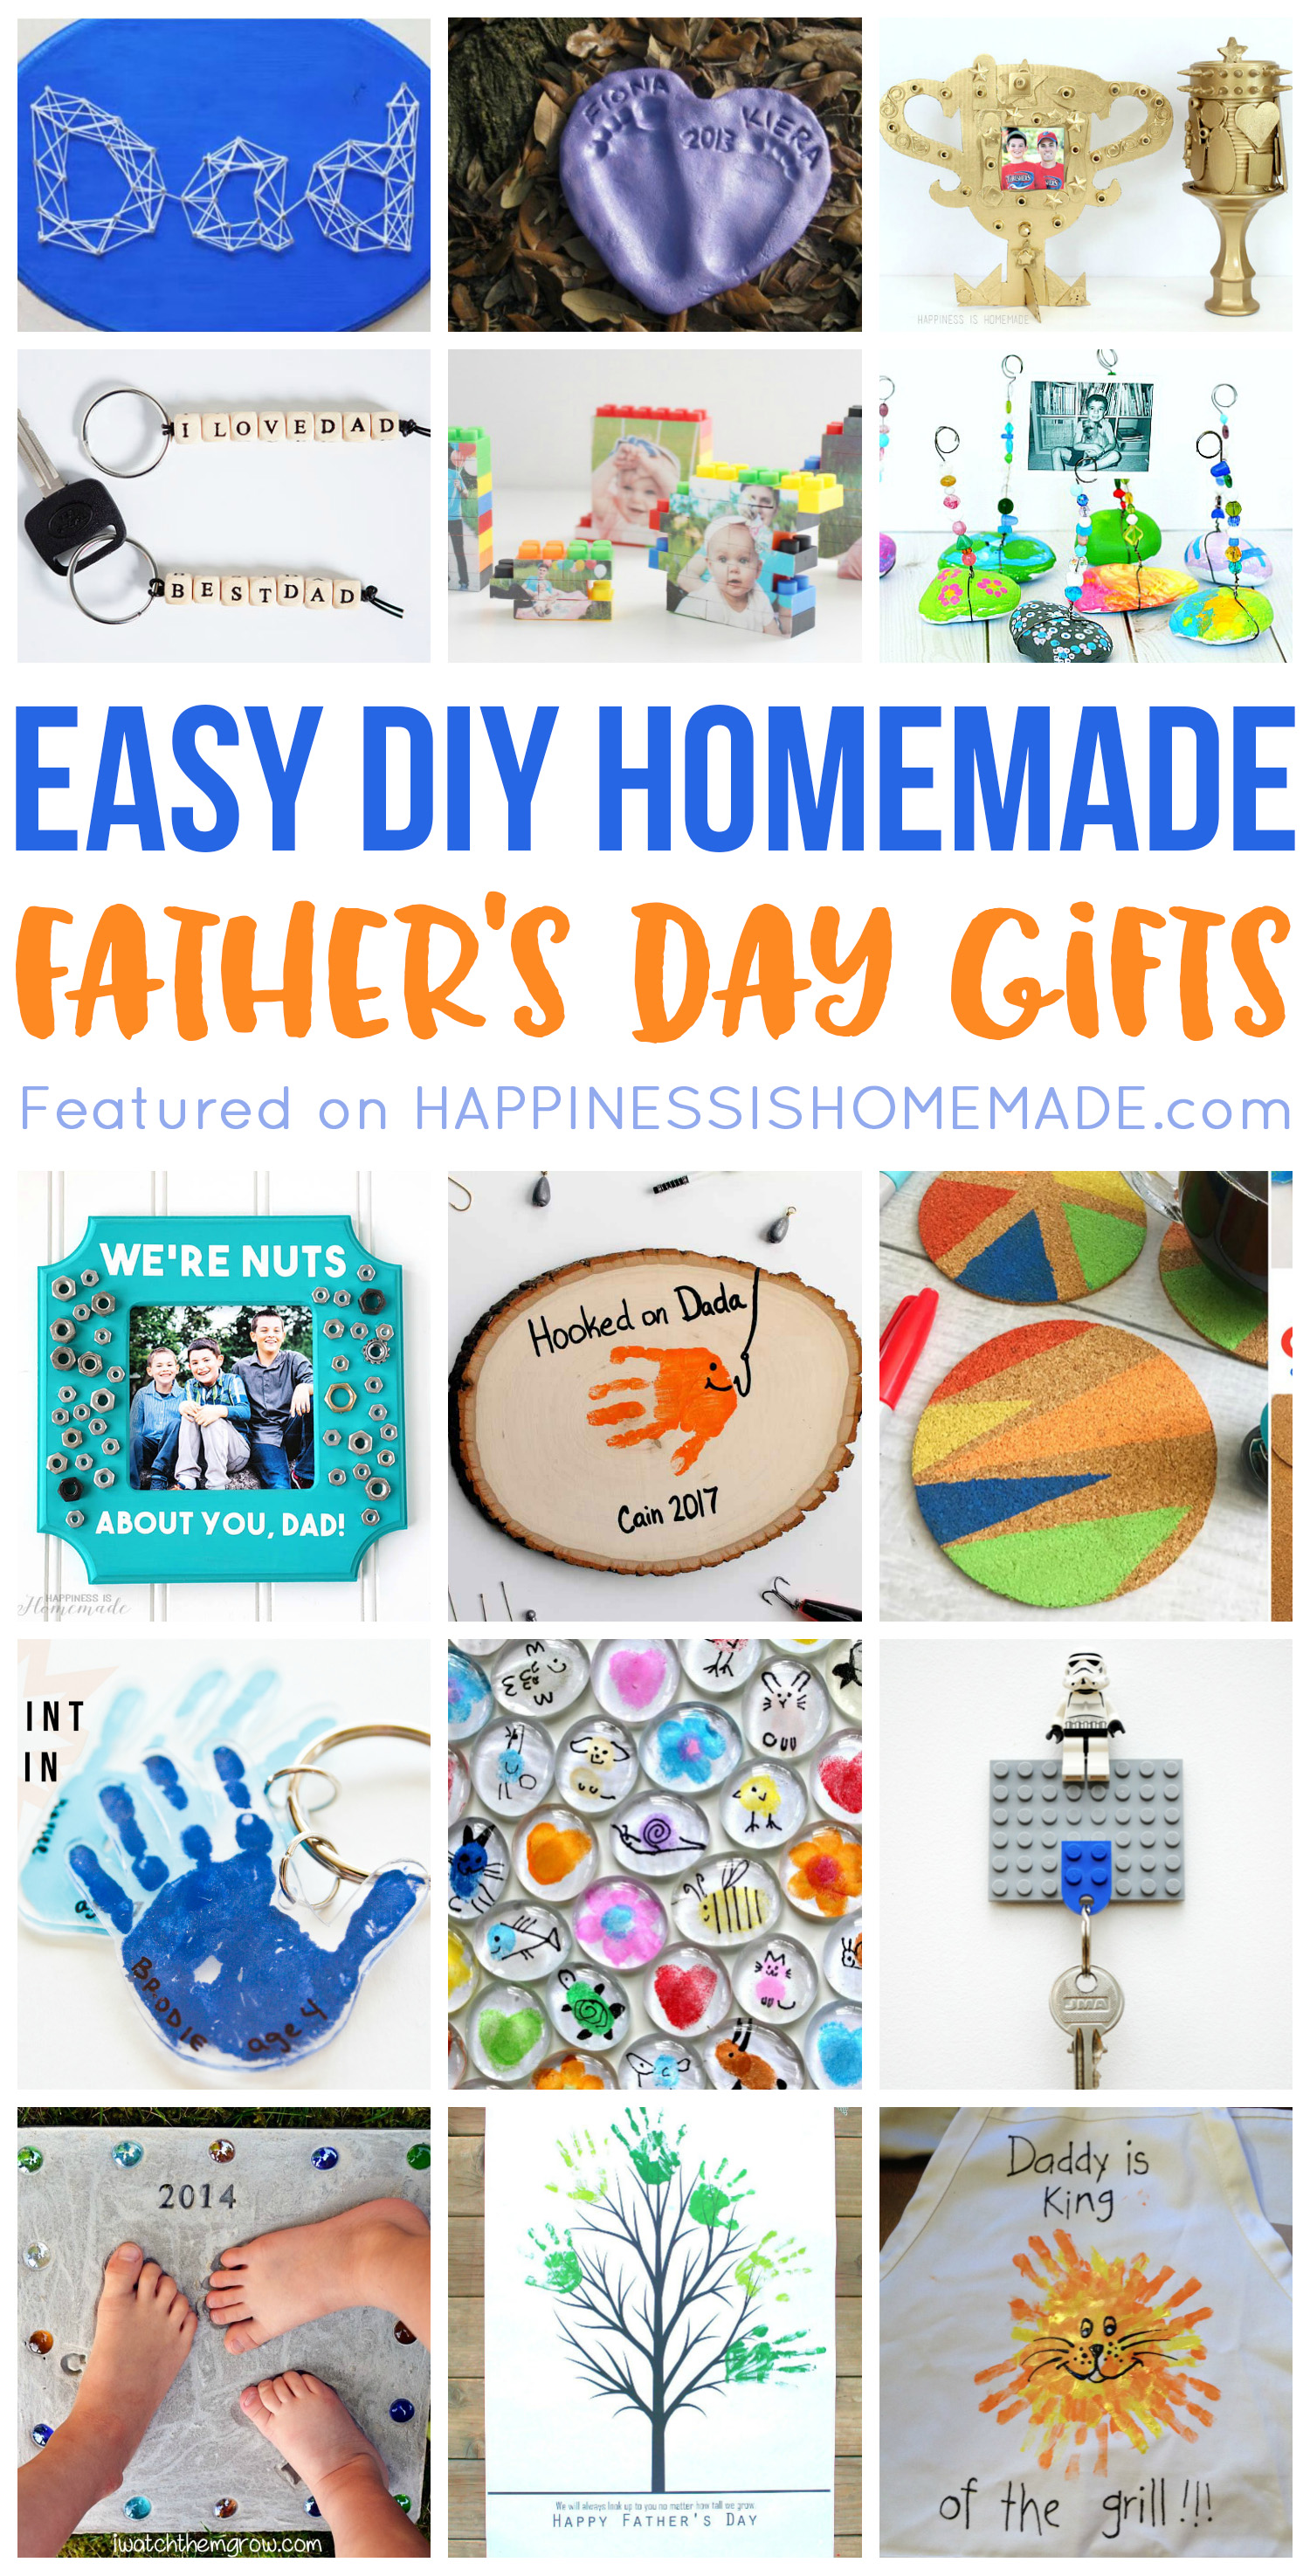 15 Father's Day DIY Gifts - The Crafting Nook